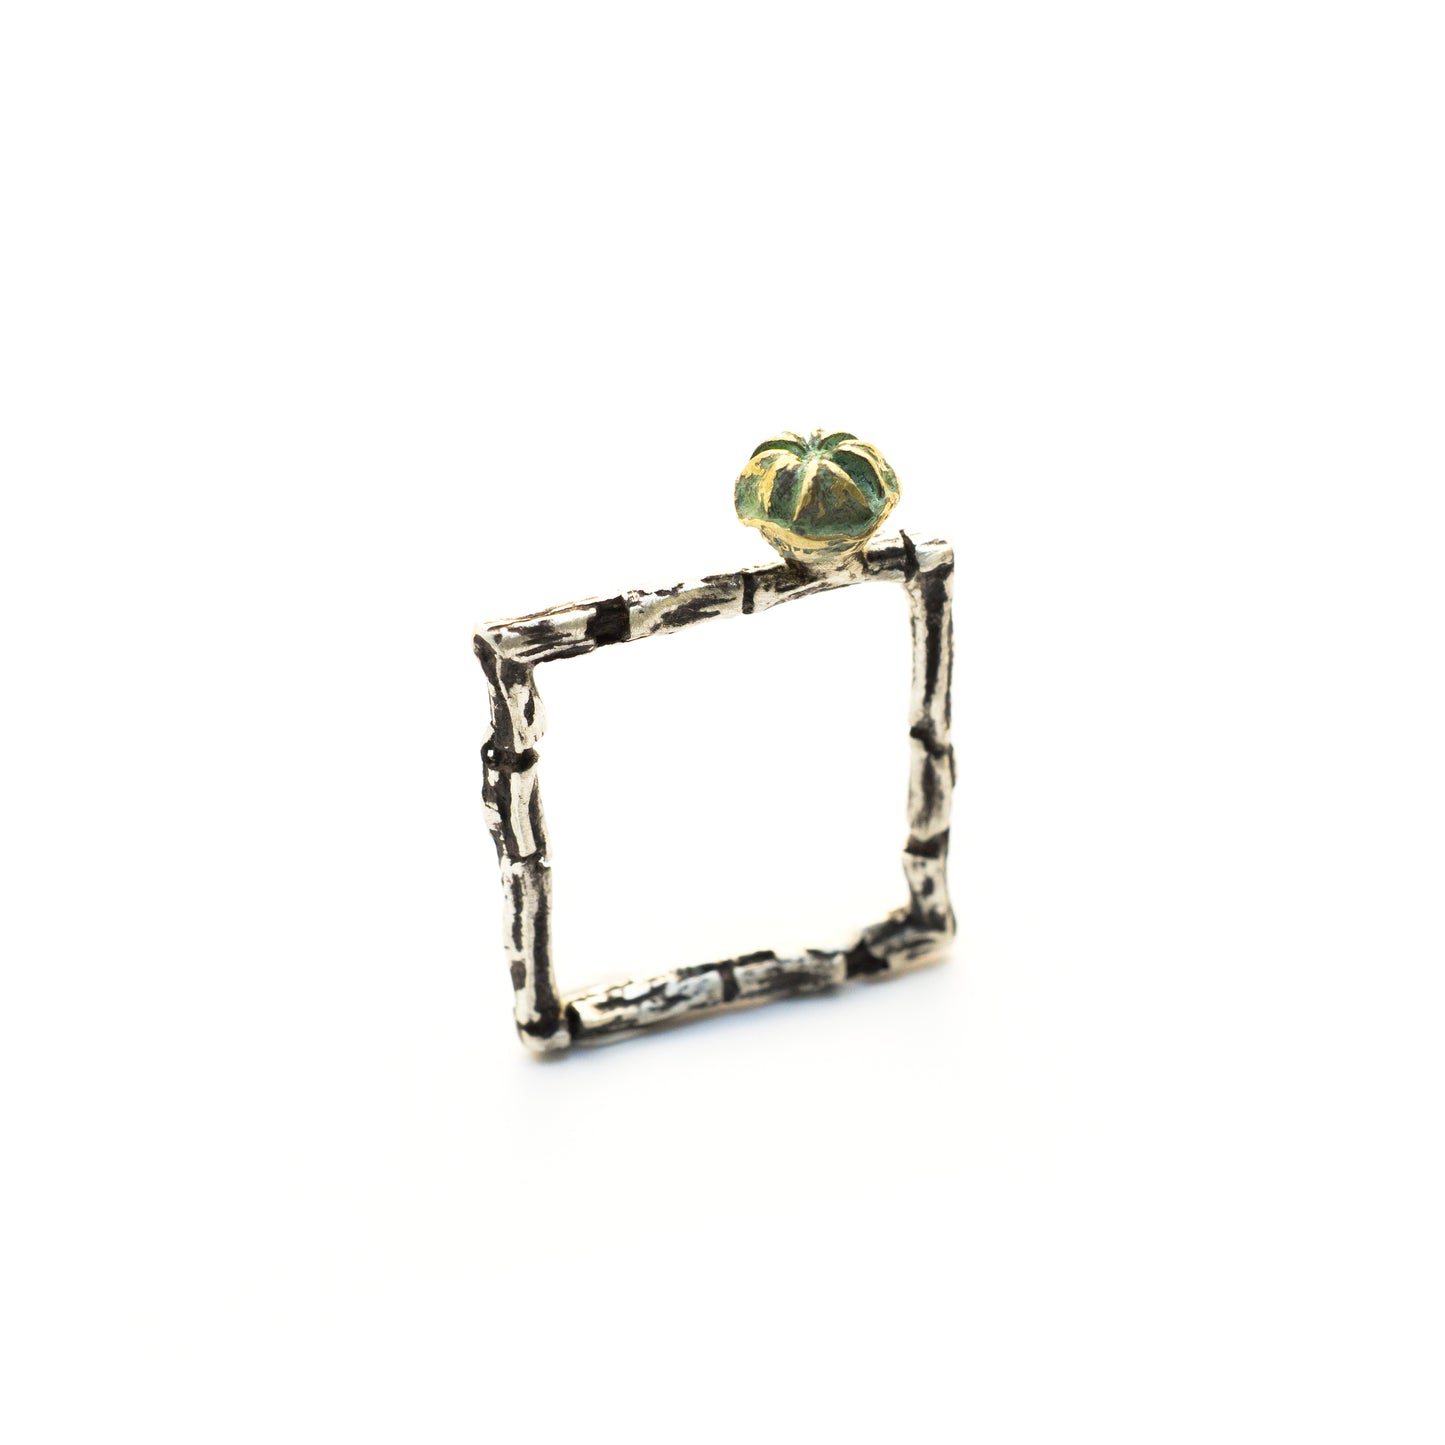 Handcrafted Sterling Silver and Brass Eucalyptus Square Ring - Unique One-of-a-Kind Nature-Inspired Jewelry